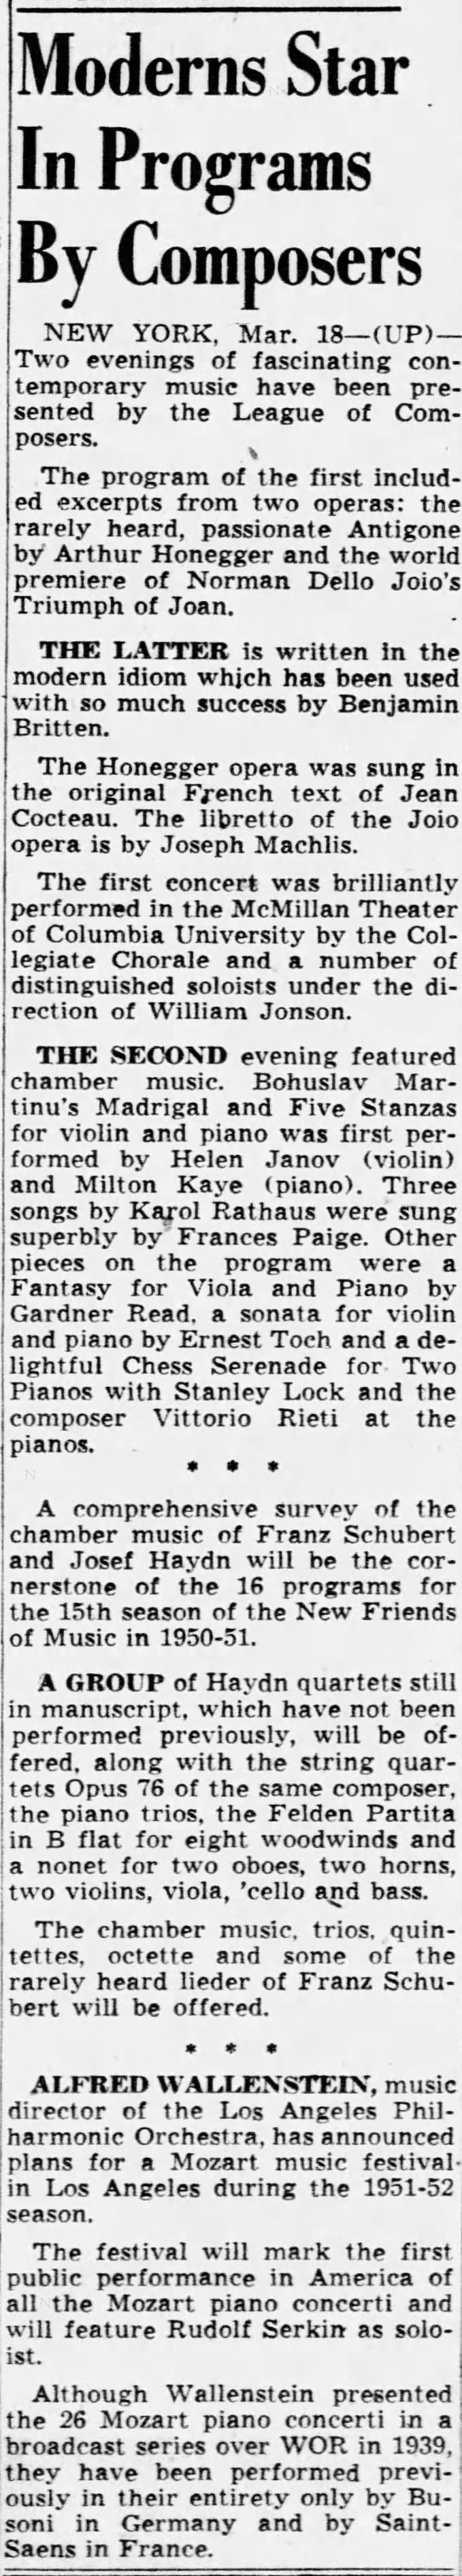 Moderns star in programs by composers 19/03/1950